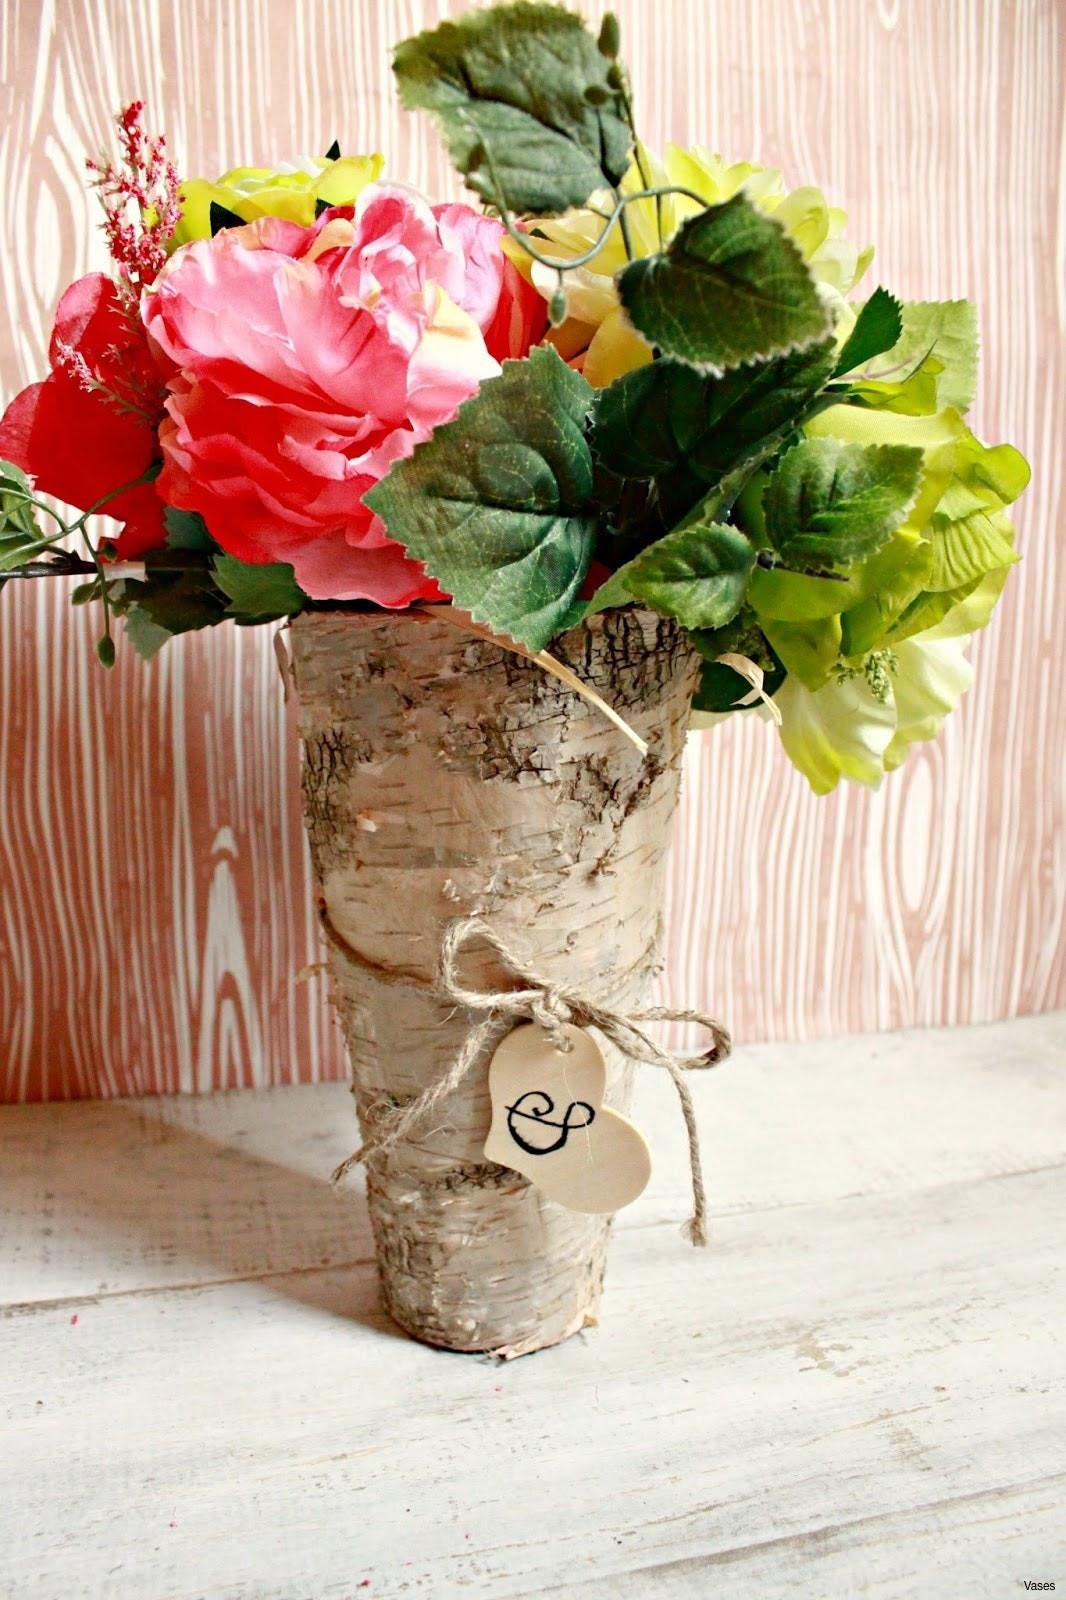 22 Cute Decorative Bottles and Vases 2022 free download decorative bottles and vases of diy wedding ideas on a budget fresh flowers and decorations for in diy wedding ideas on a budget fresh flowers and decorations for weddings h vases diy wood